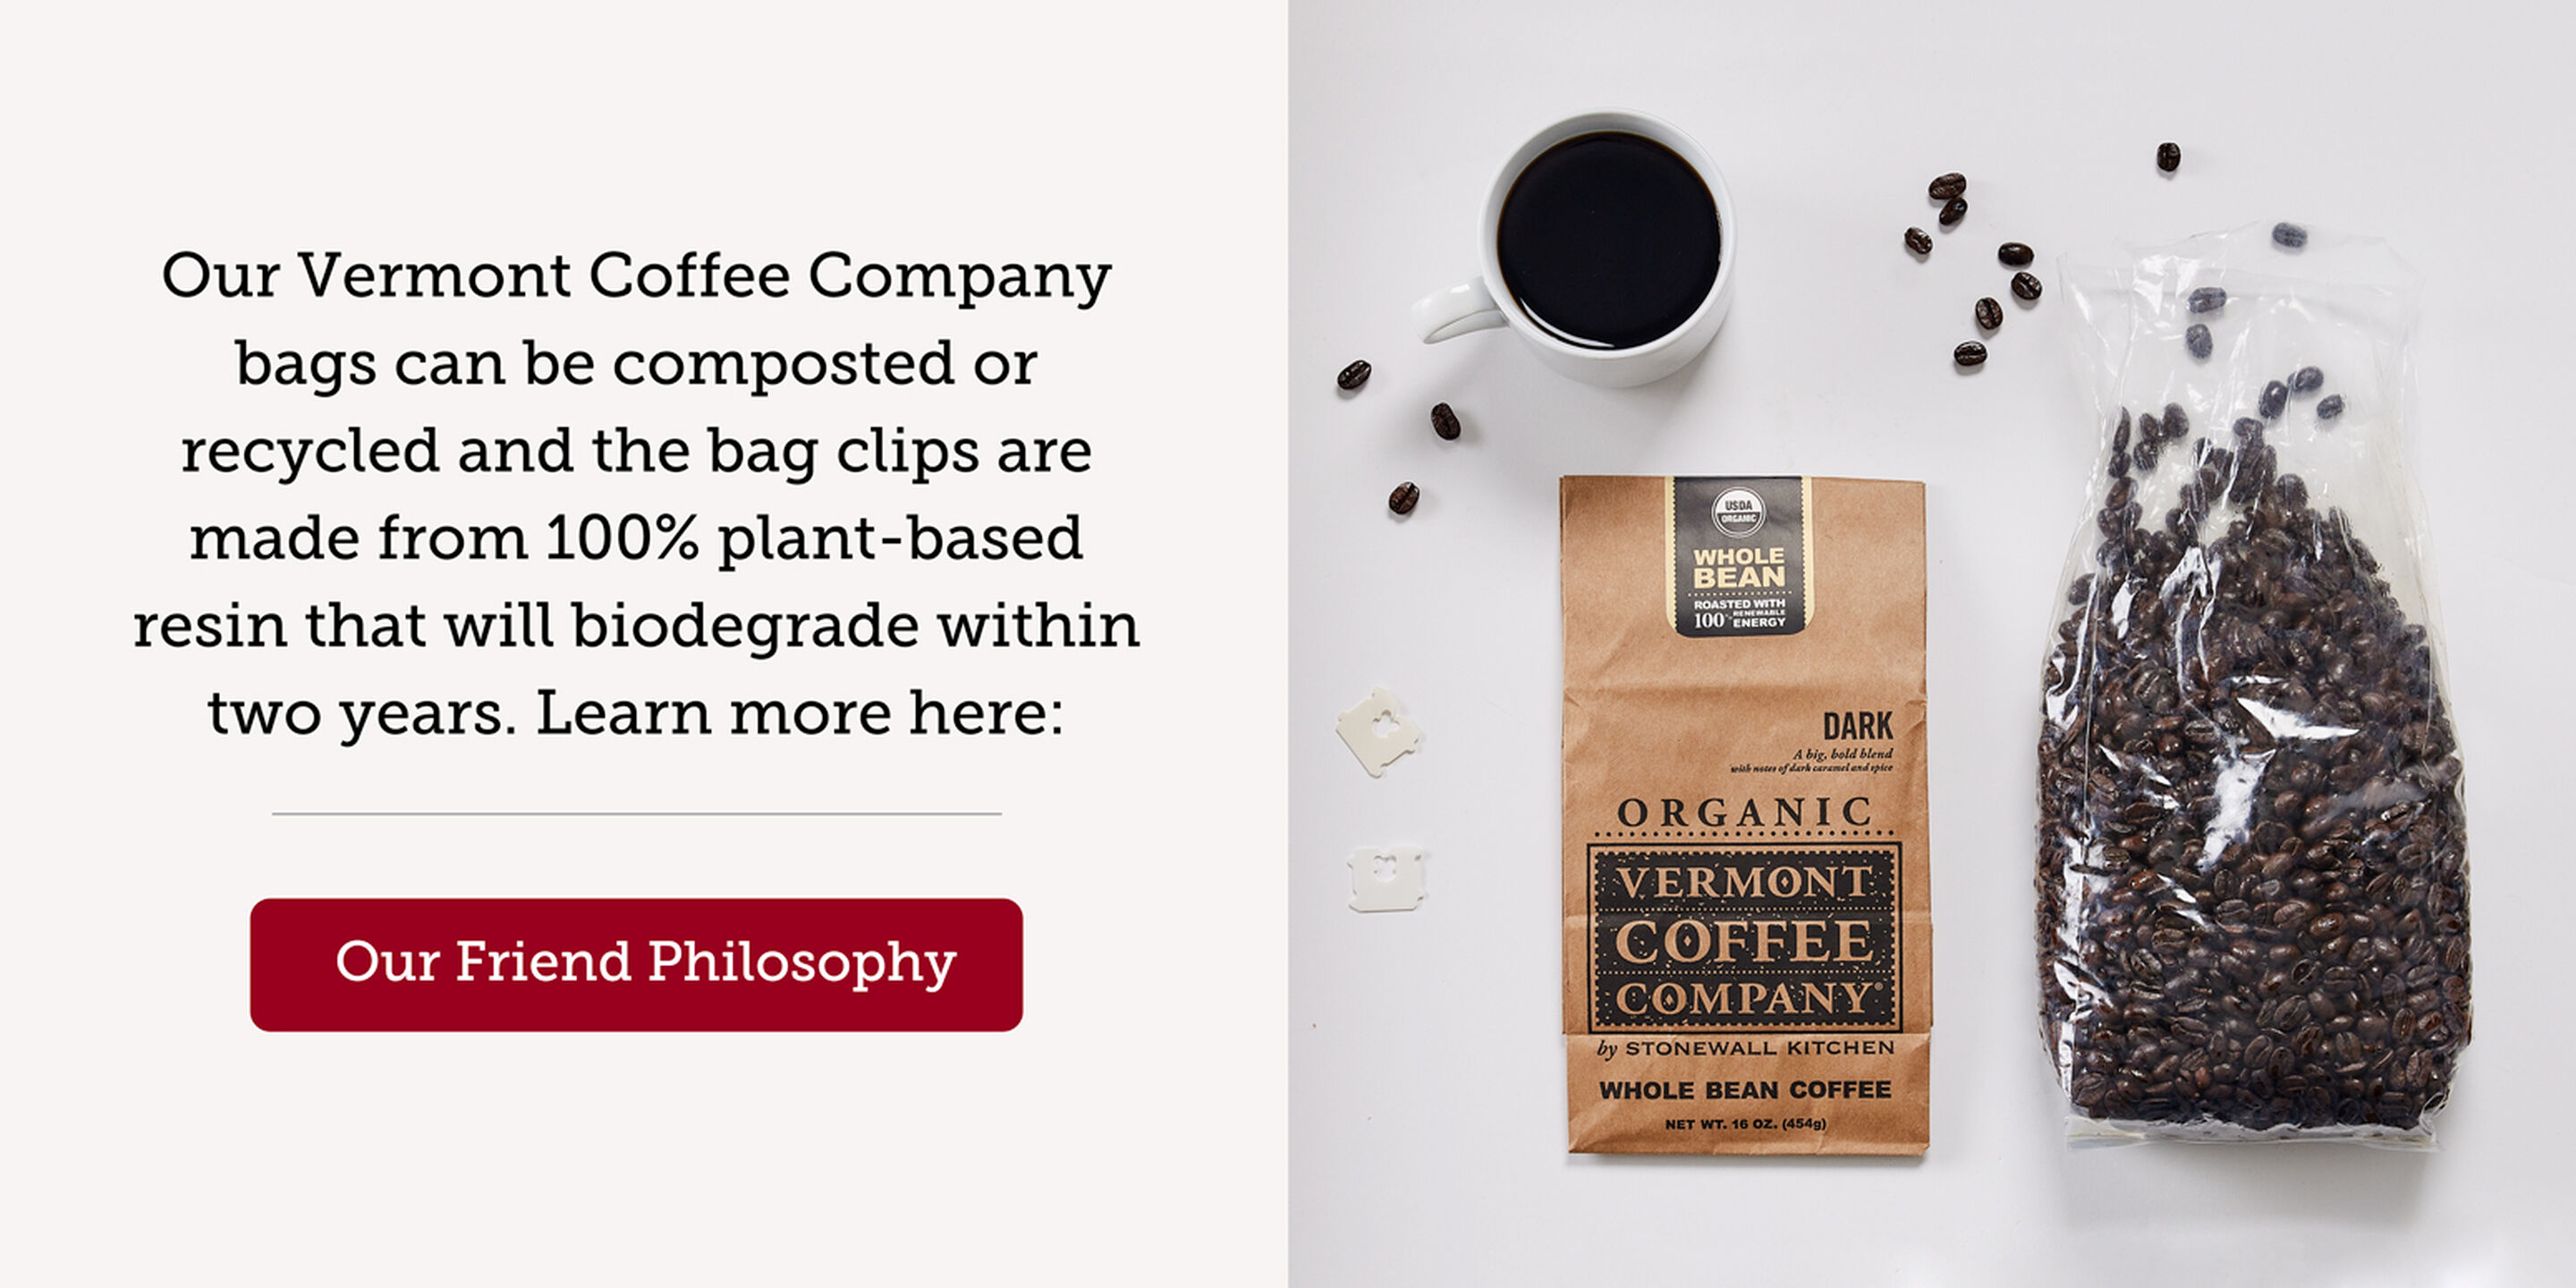 Our Vermont Coffee Company bags can be composted or recycled and the bag clips are made from 100% plant-based resin that will biodegrade within two years. Learn more here: | Our Friend Philosophy